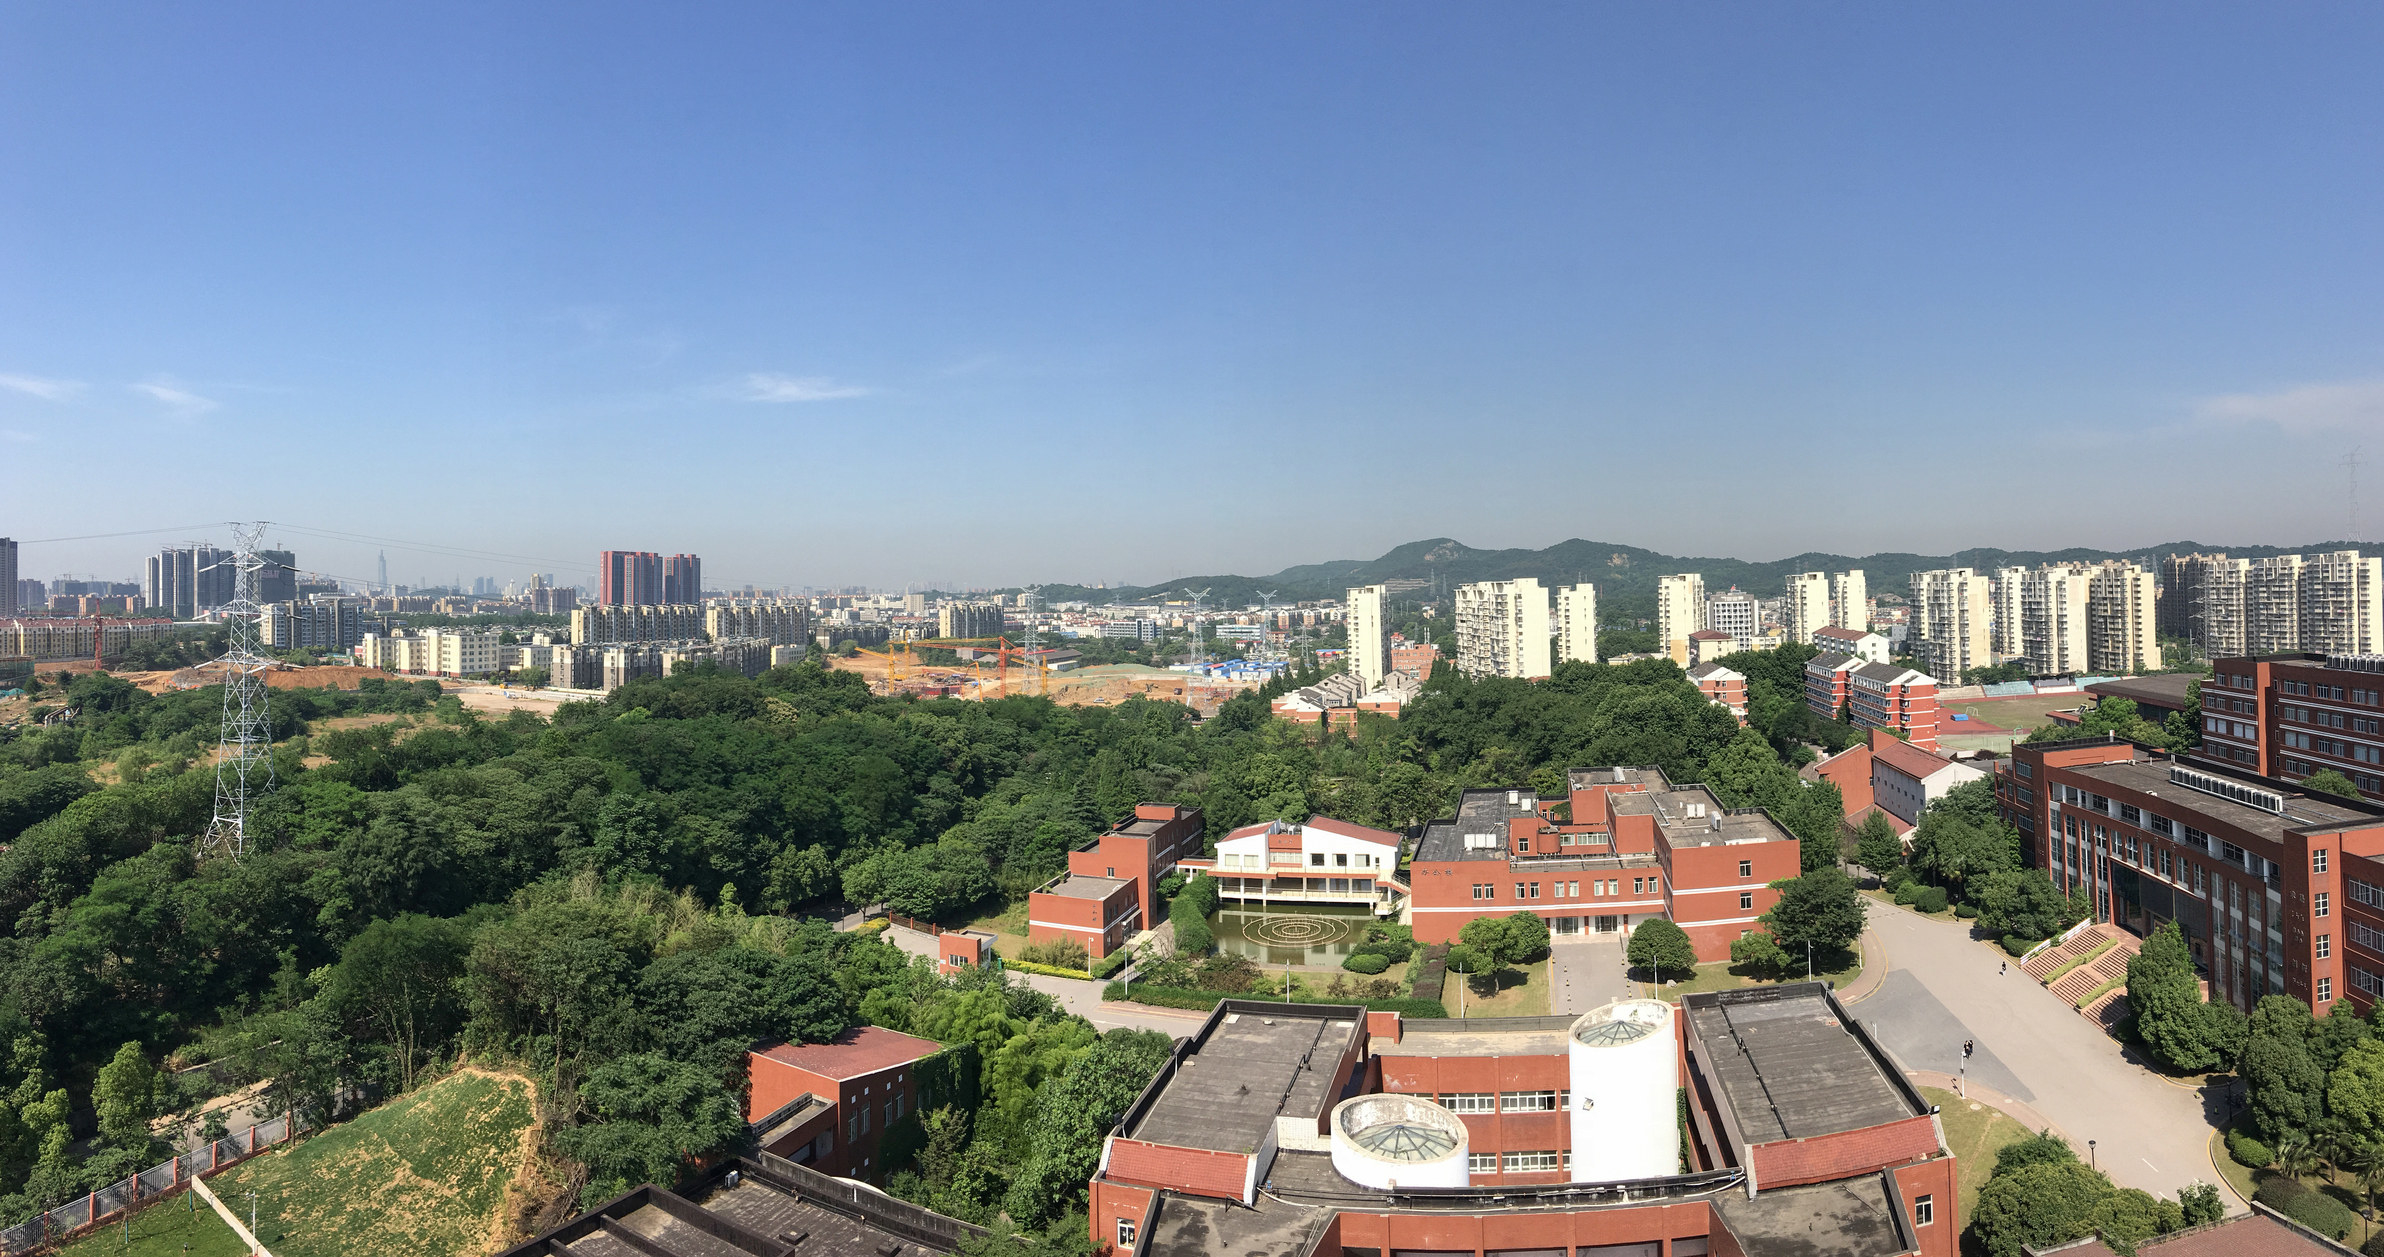 Overview of Nanjing University showing tall buildings and parks with trees